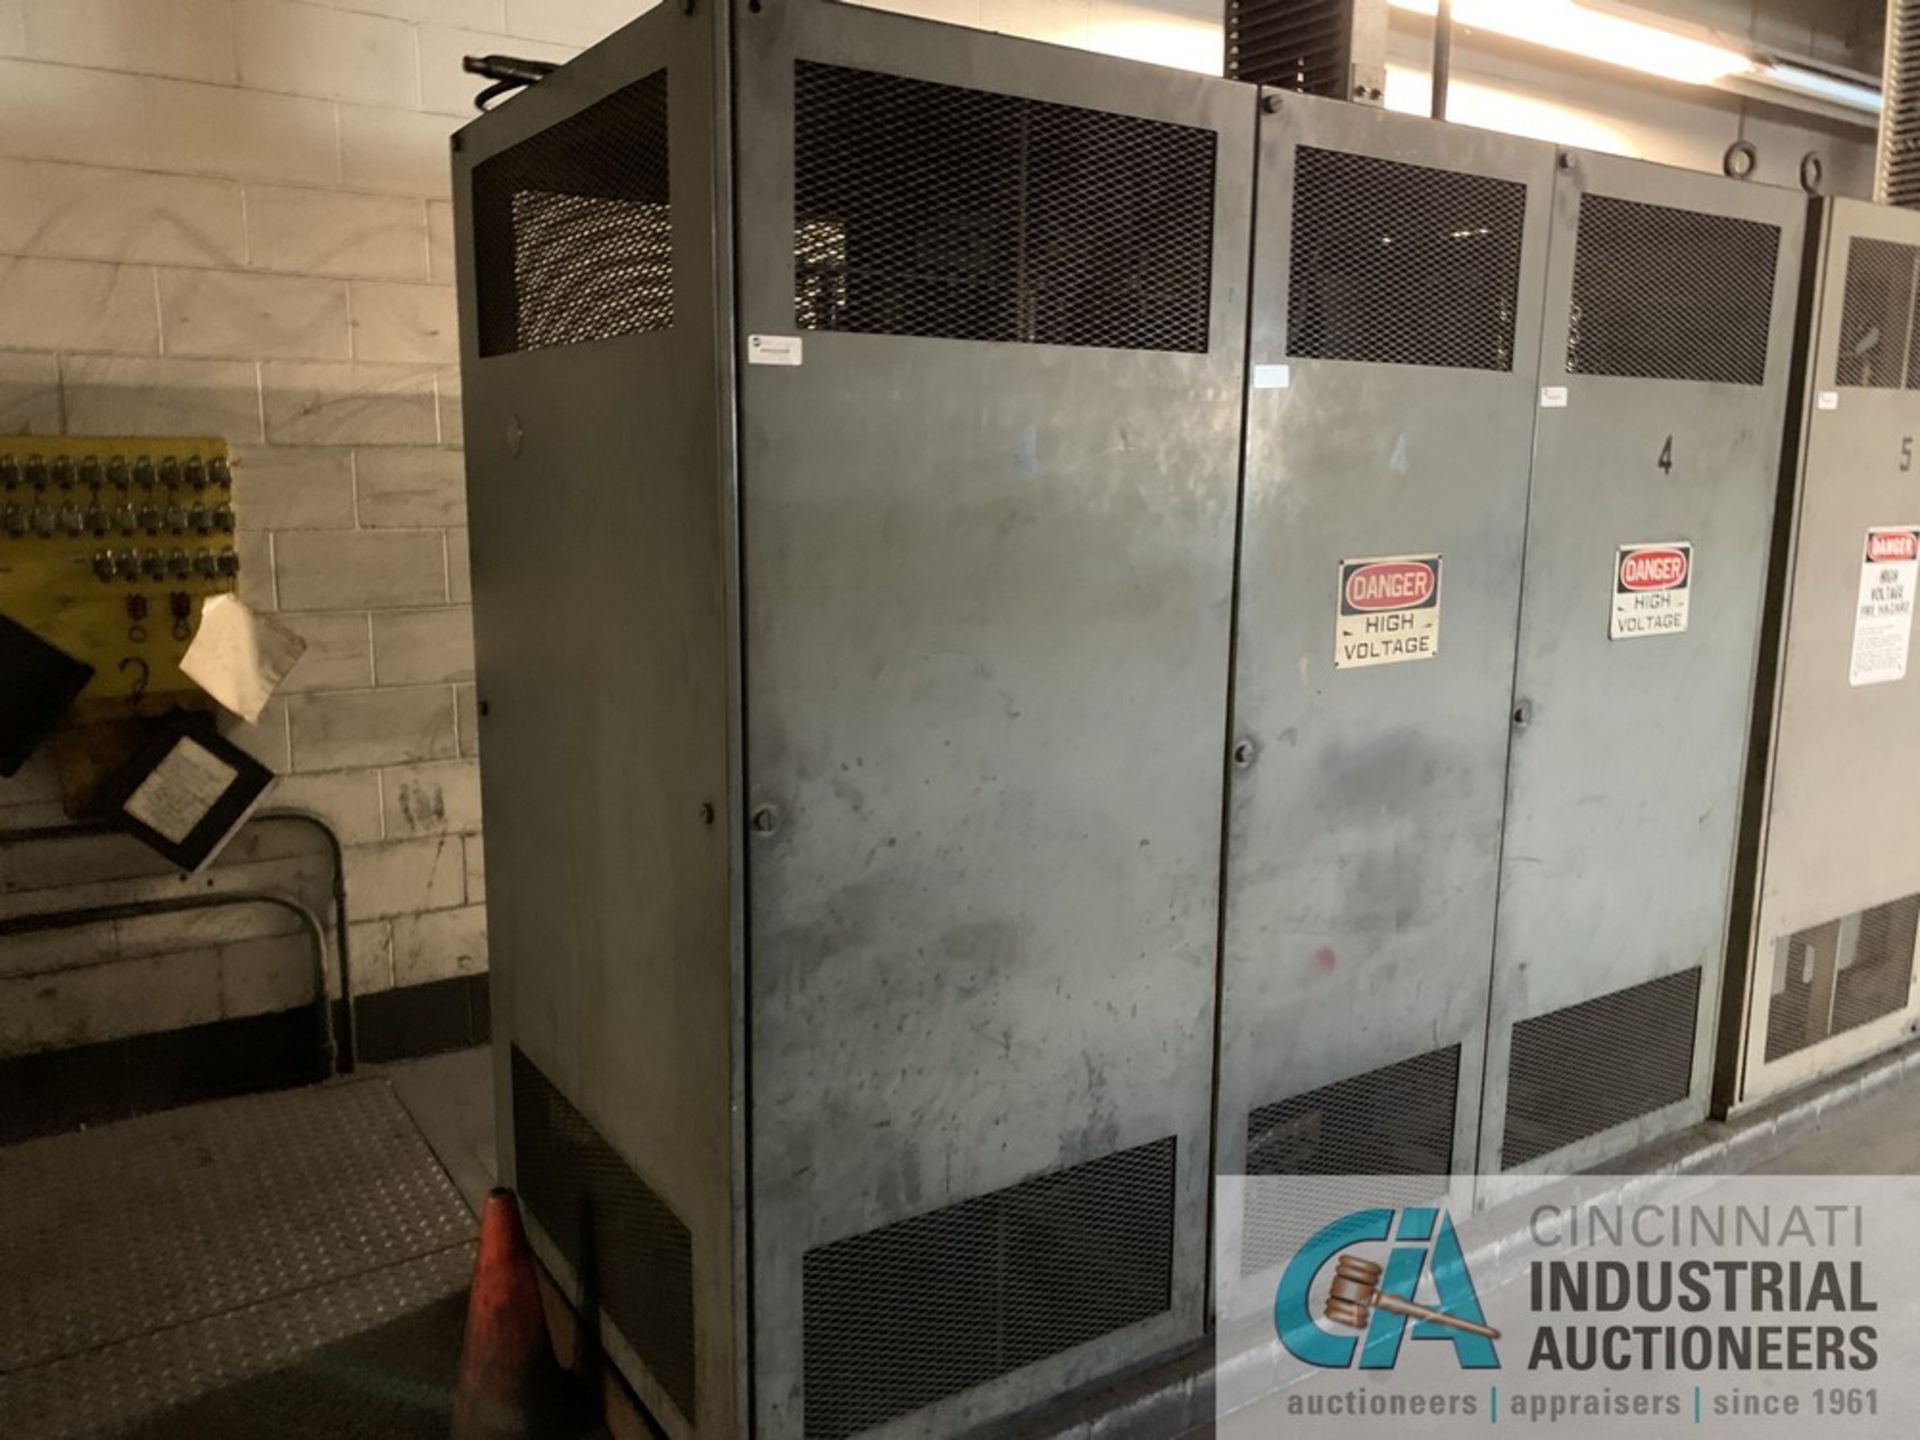 500 KW AJAX MAGNATHERMIC POWER SUPPLY AND CONTROL; 575V, 1102 KVA, 1917 AMP, 500 KW, CONTROL - Image 6 of 13